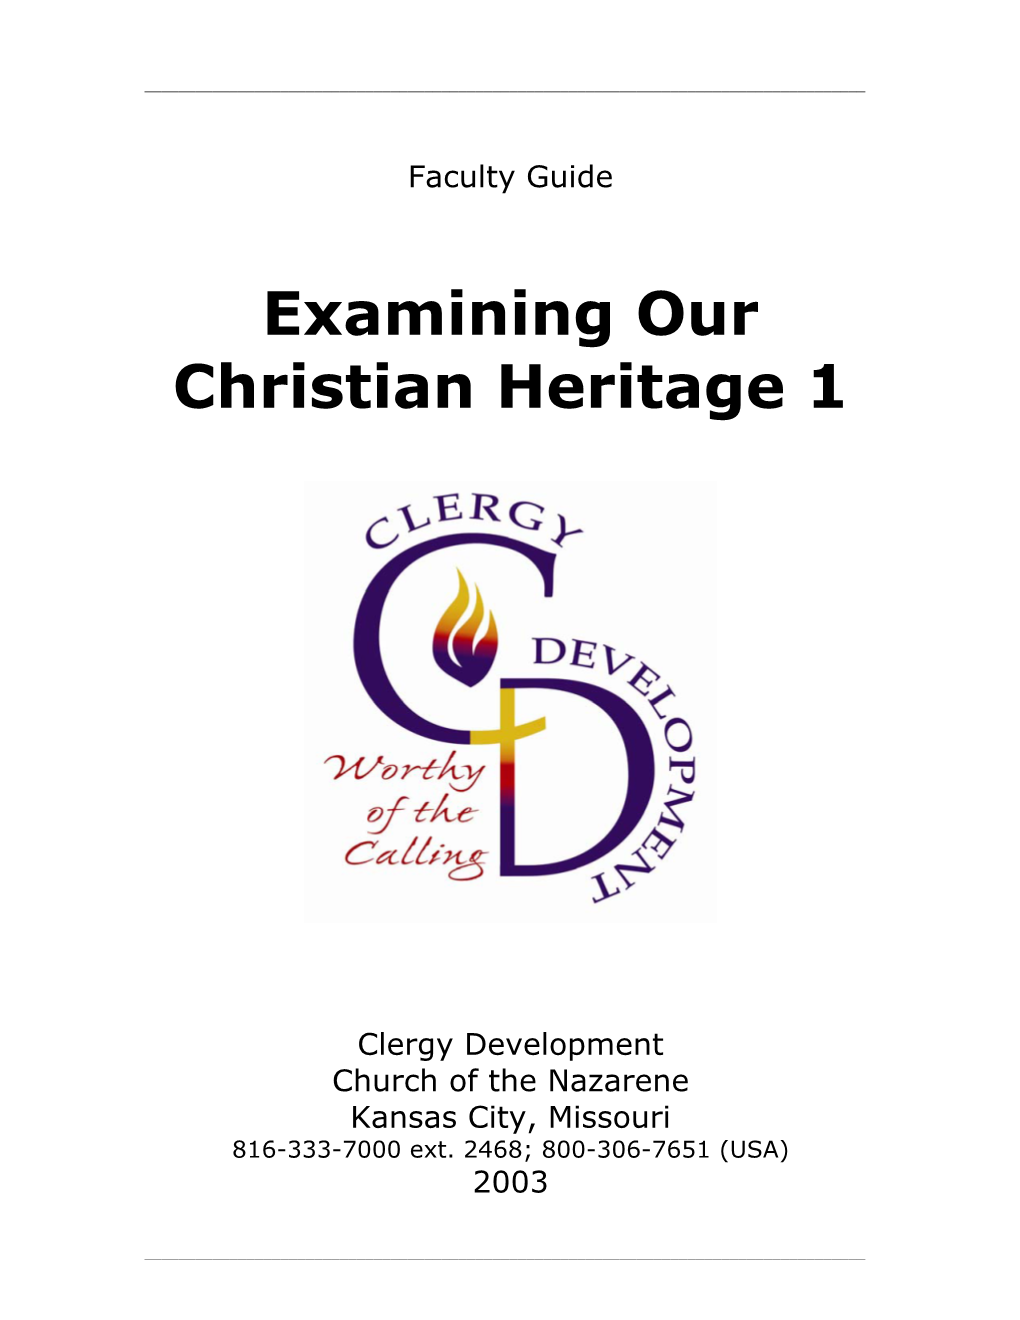 Examining Our Christian Heritage 1